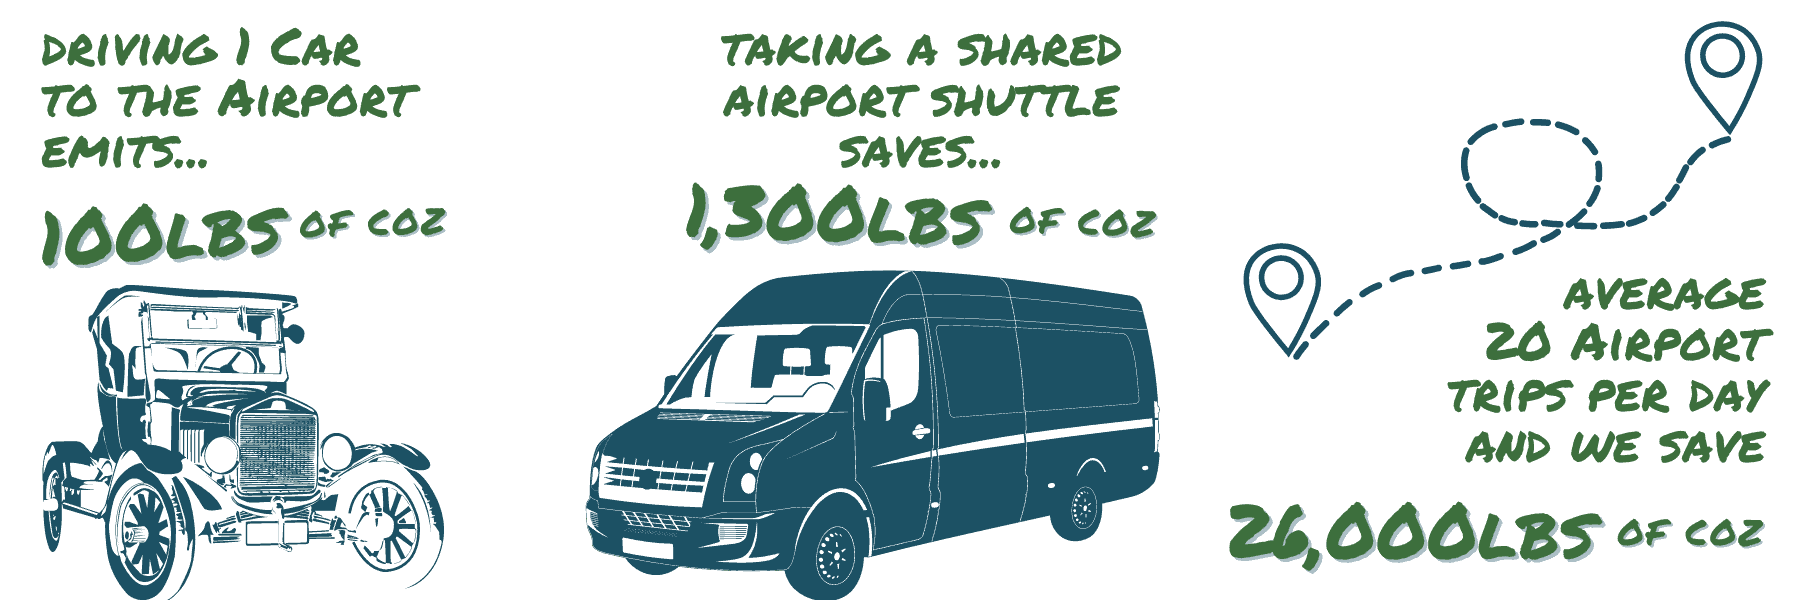 save the earth with shared shuttles